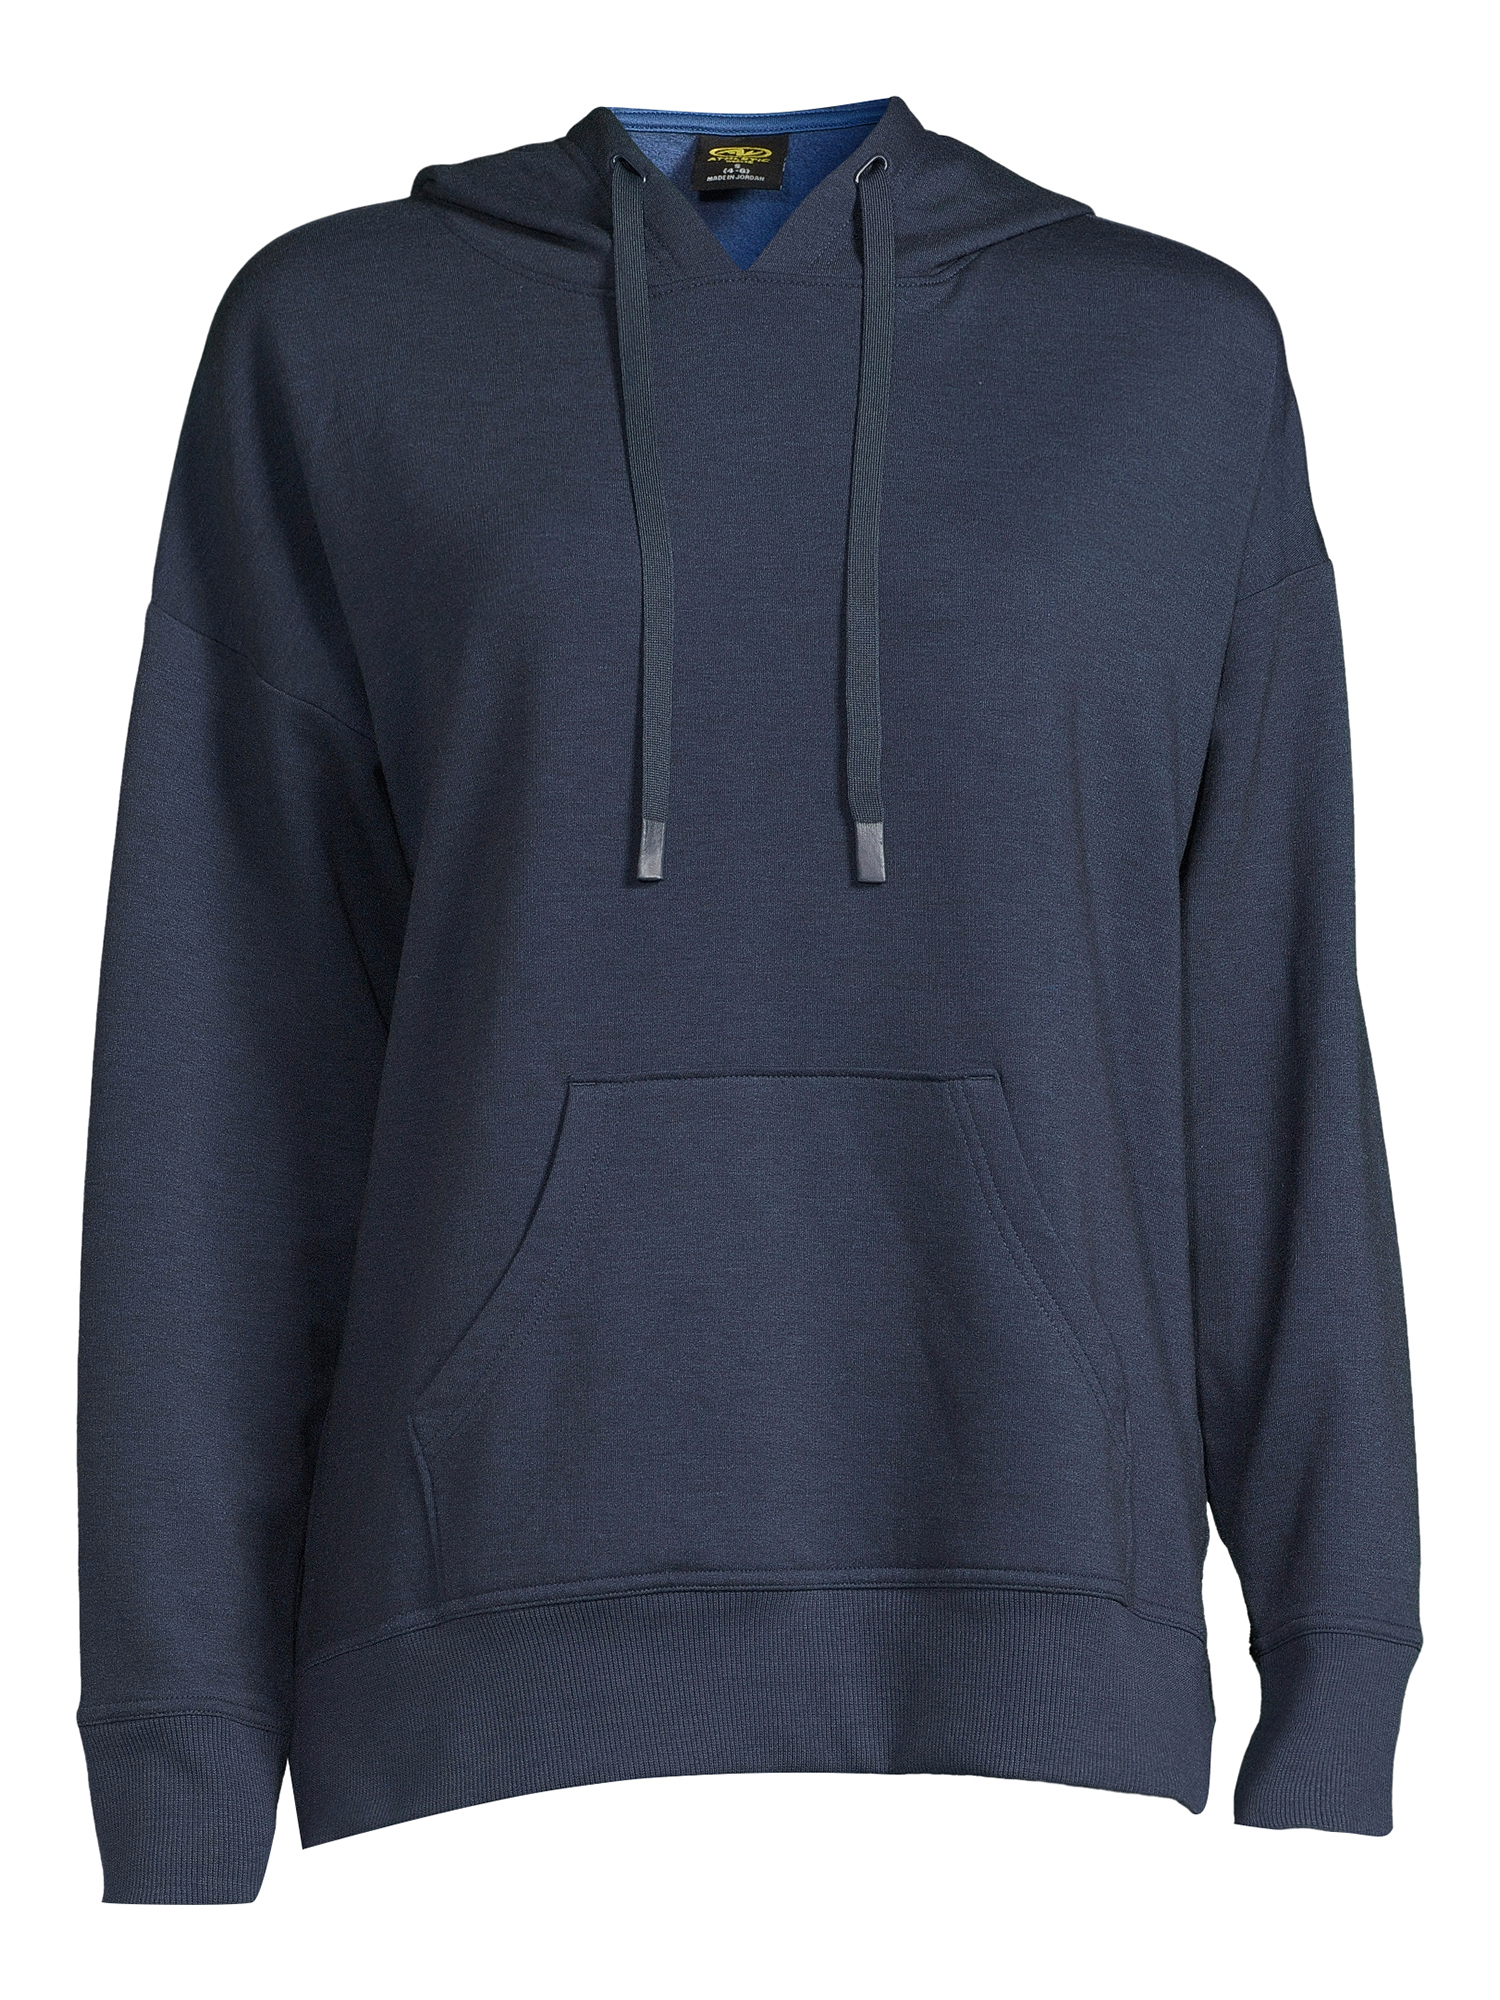 Athletic Works Women's Soft Hoodie With Front Pockets - image 4 of 5